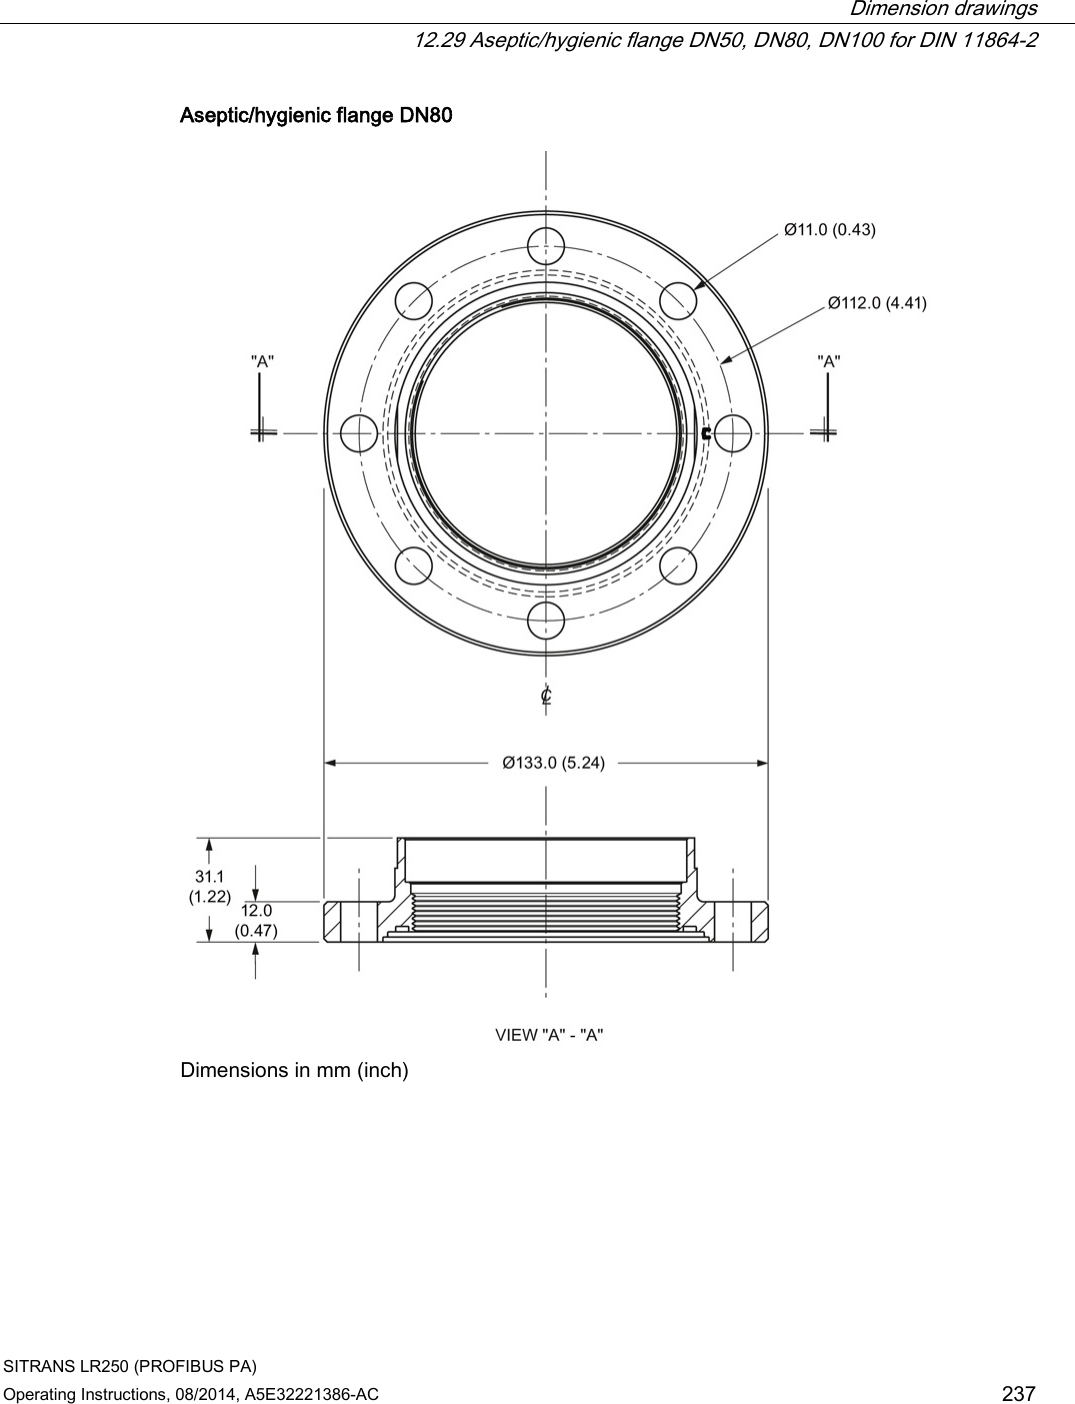  Dimension drawings  12.29 Aseptic/hygienic flange DN50, DN80, DN100 for DIN 11864-2 SITRANS LR250 (PROFIBUS PA) Operating Instructions, 08/2014, A5E32221386-AC 237 Aseptic/hygienic flange DN80  Dimensions in mm (inch) 